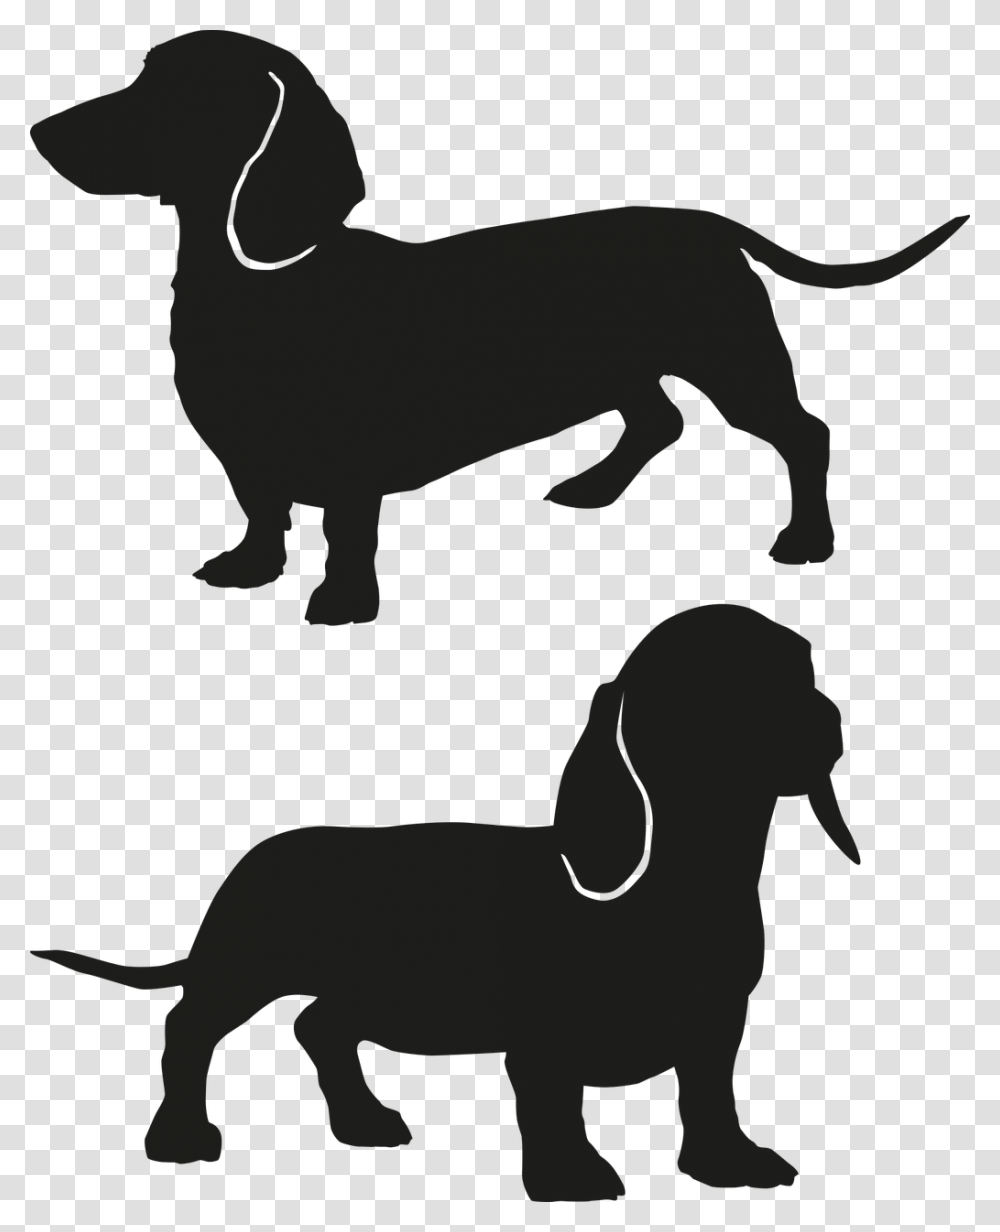 Sausage Dog Dog Sausage Dachshund Silhouette Puppy Small And Long Dog, Sheep, Mammal, Animal, Goat Transparent Png